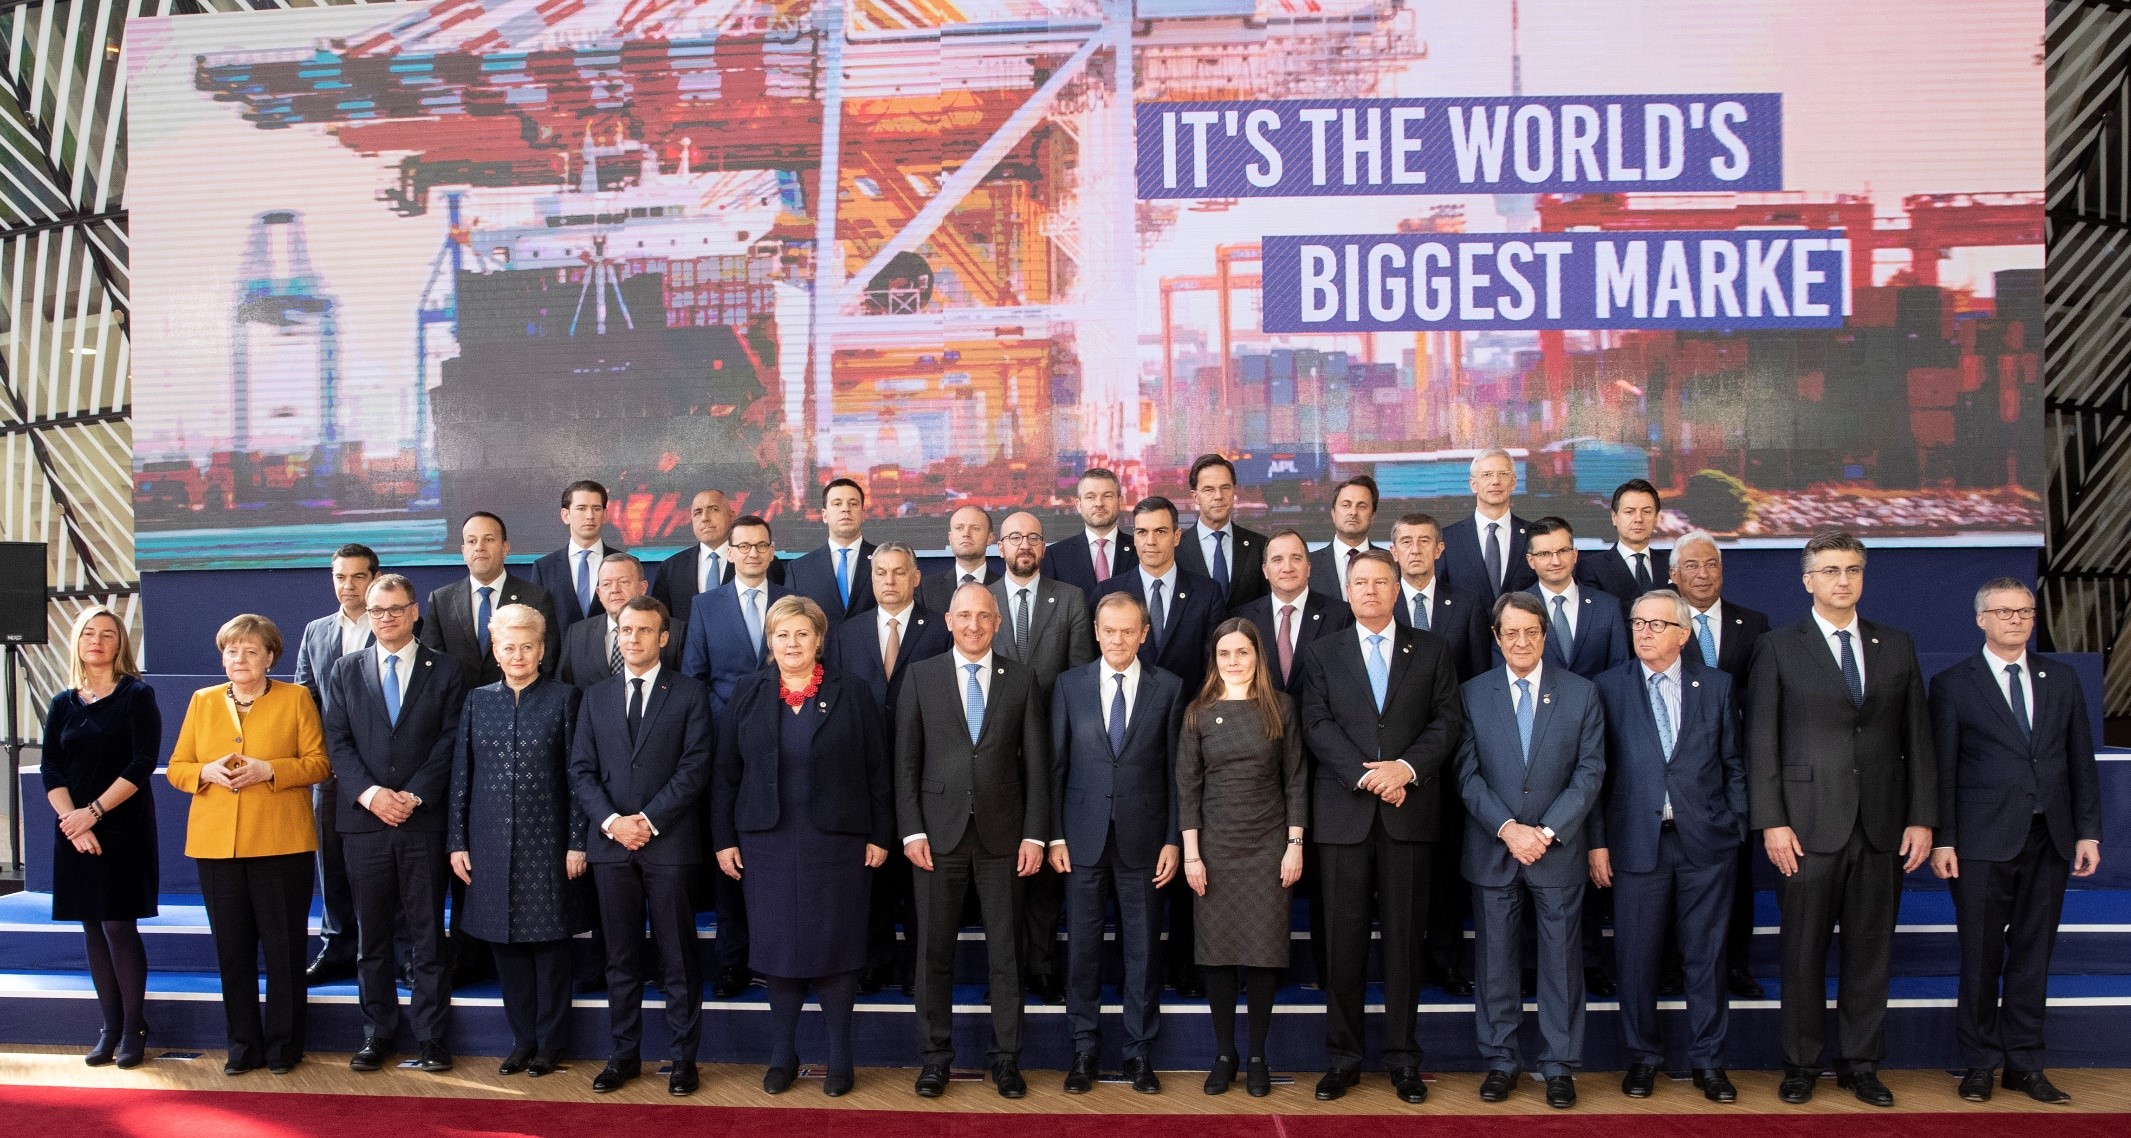 The European Council’s members picture